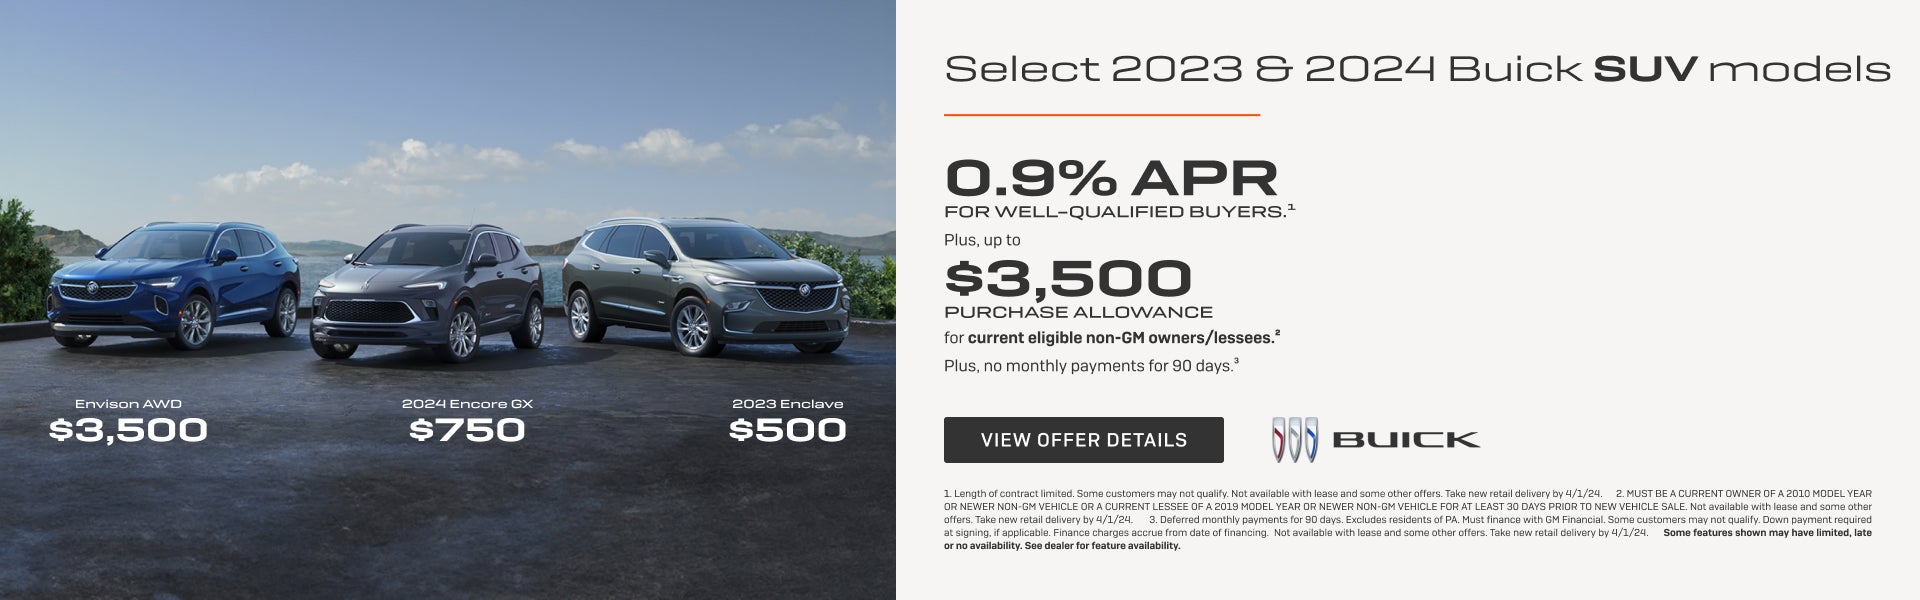 0.9% APR
FOR WELL-QUALIFIED BUYERS.1

Plus, up to $3,500 PURCHASE ALLOWANCE for current eligible ...